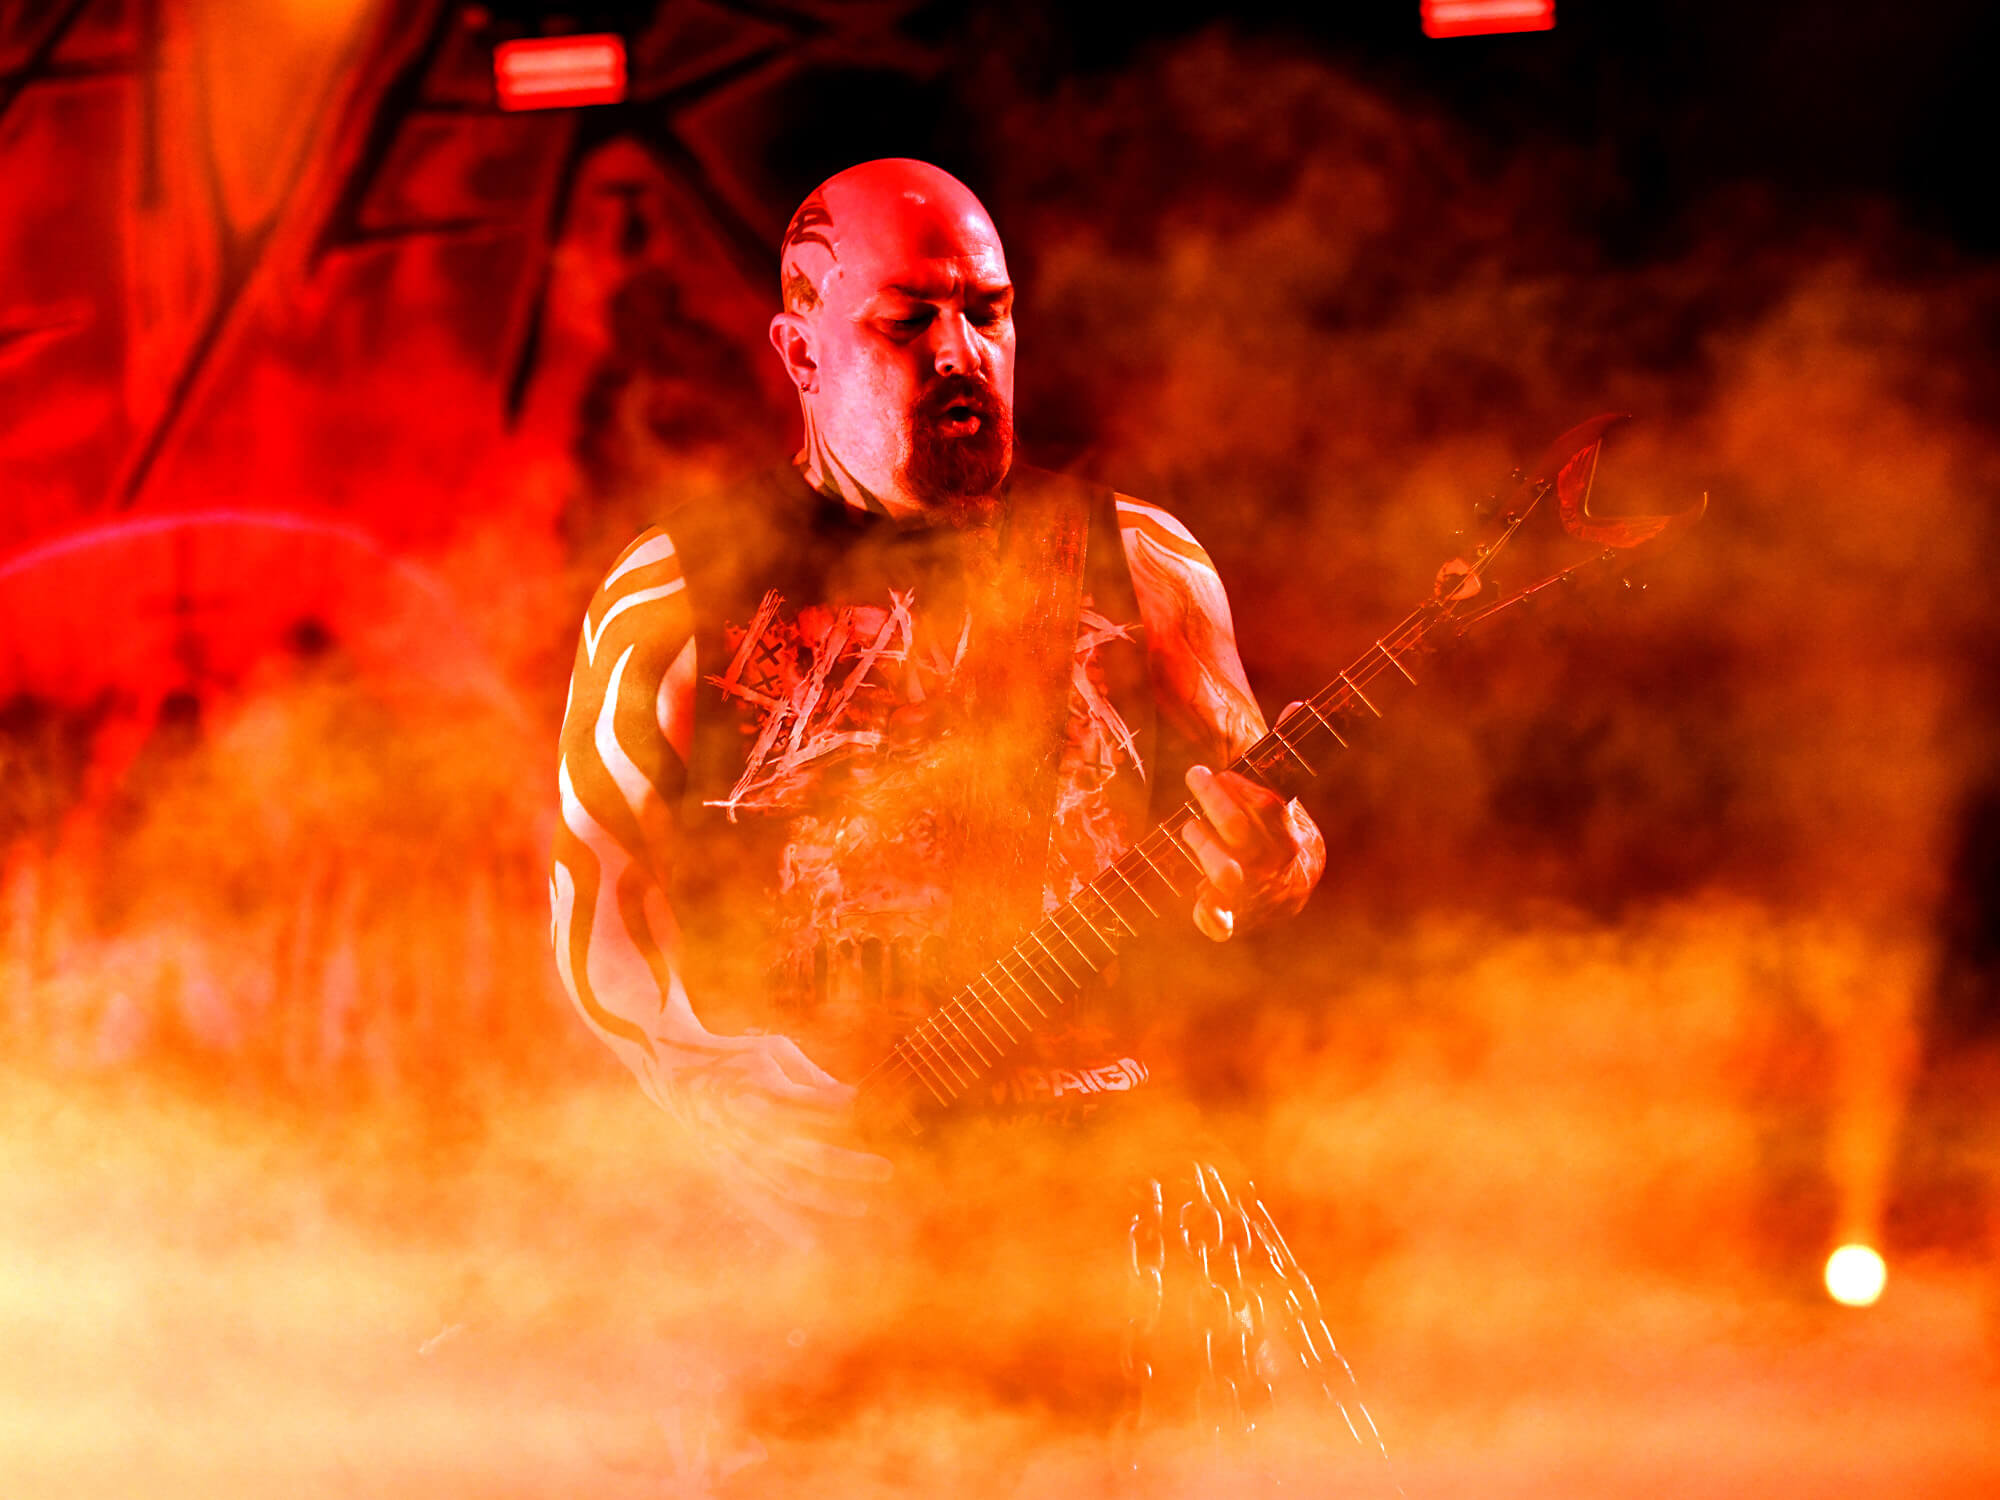 Kerry King playing guitar. He is standing among lots of smoke and red lighting.